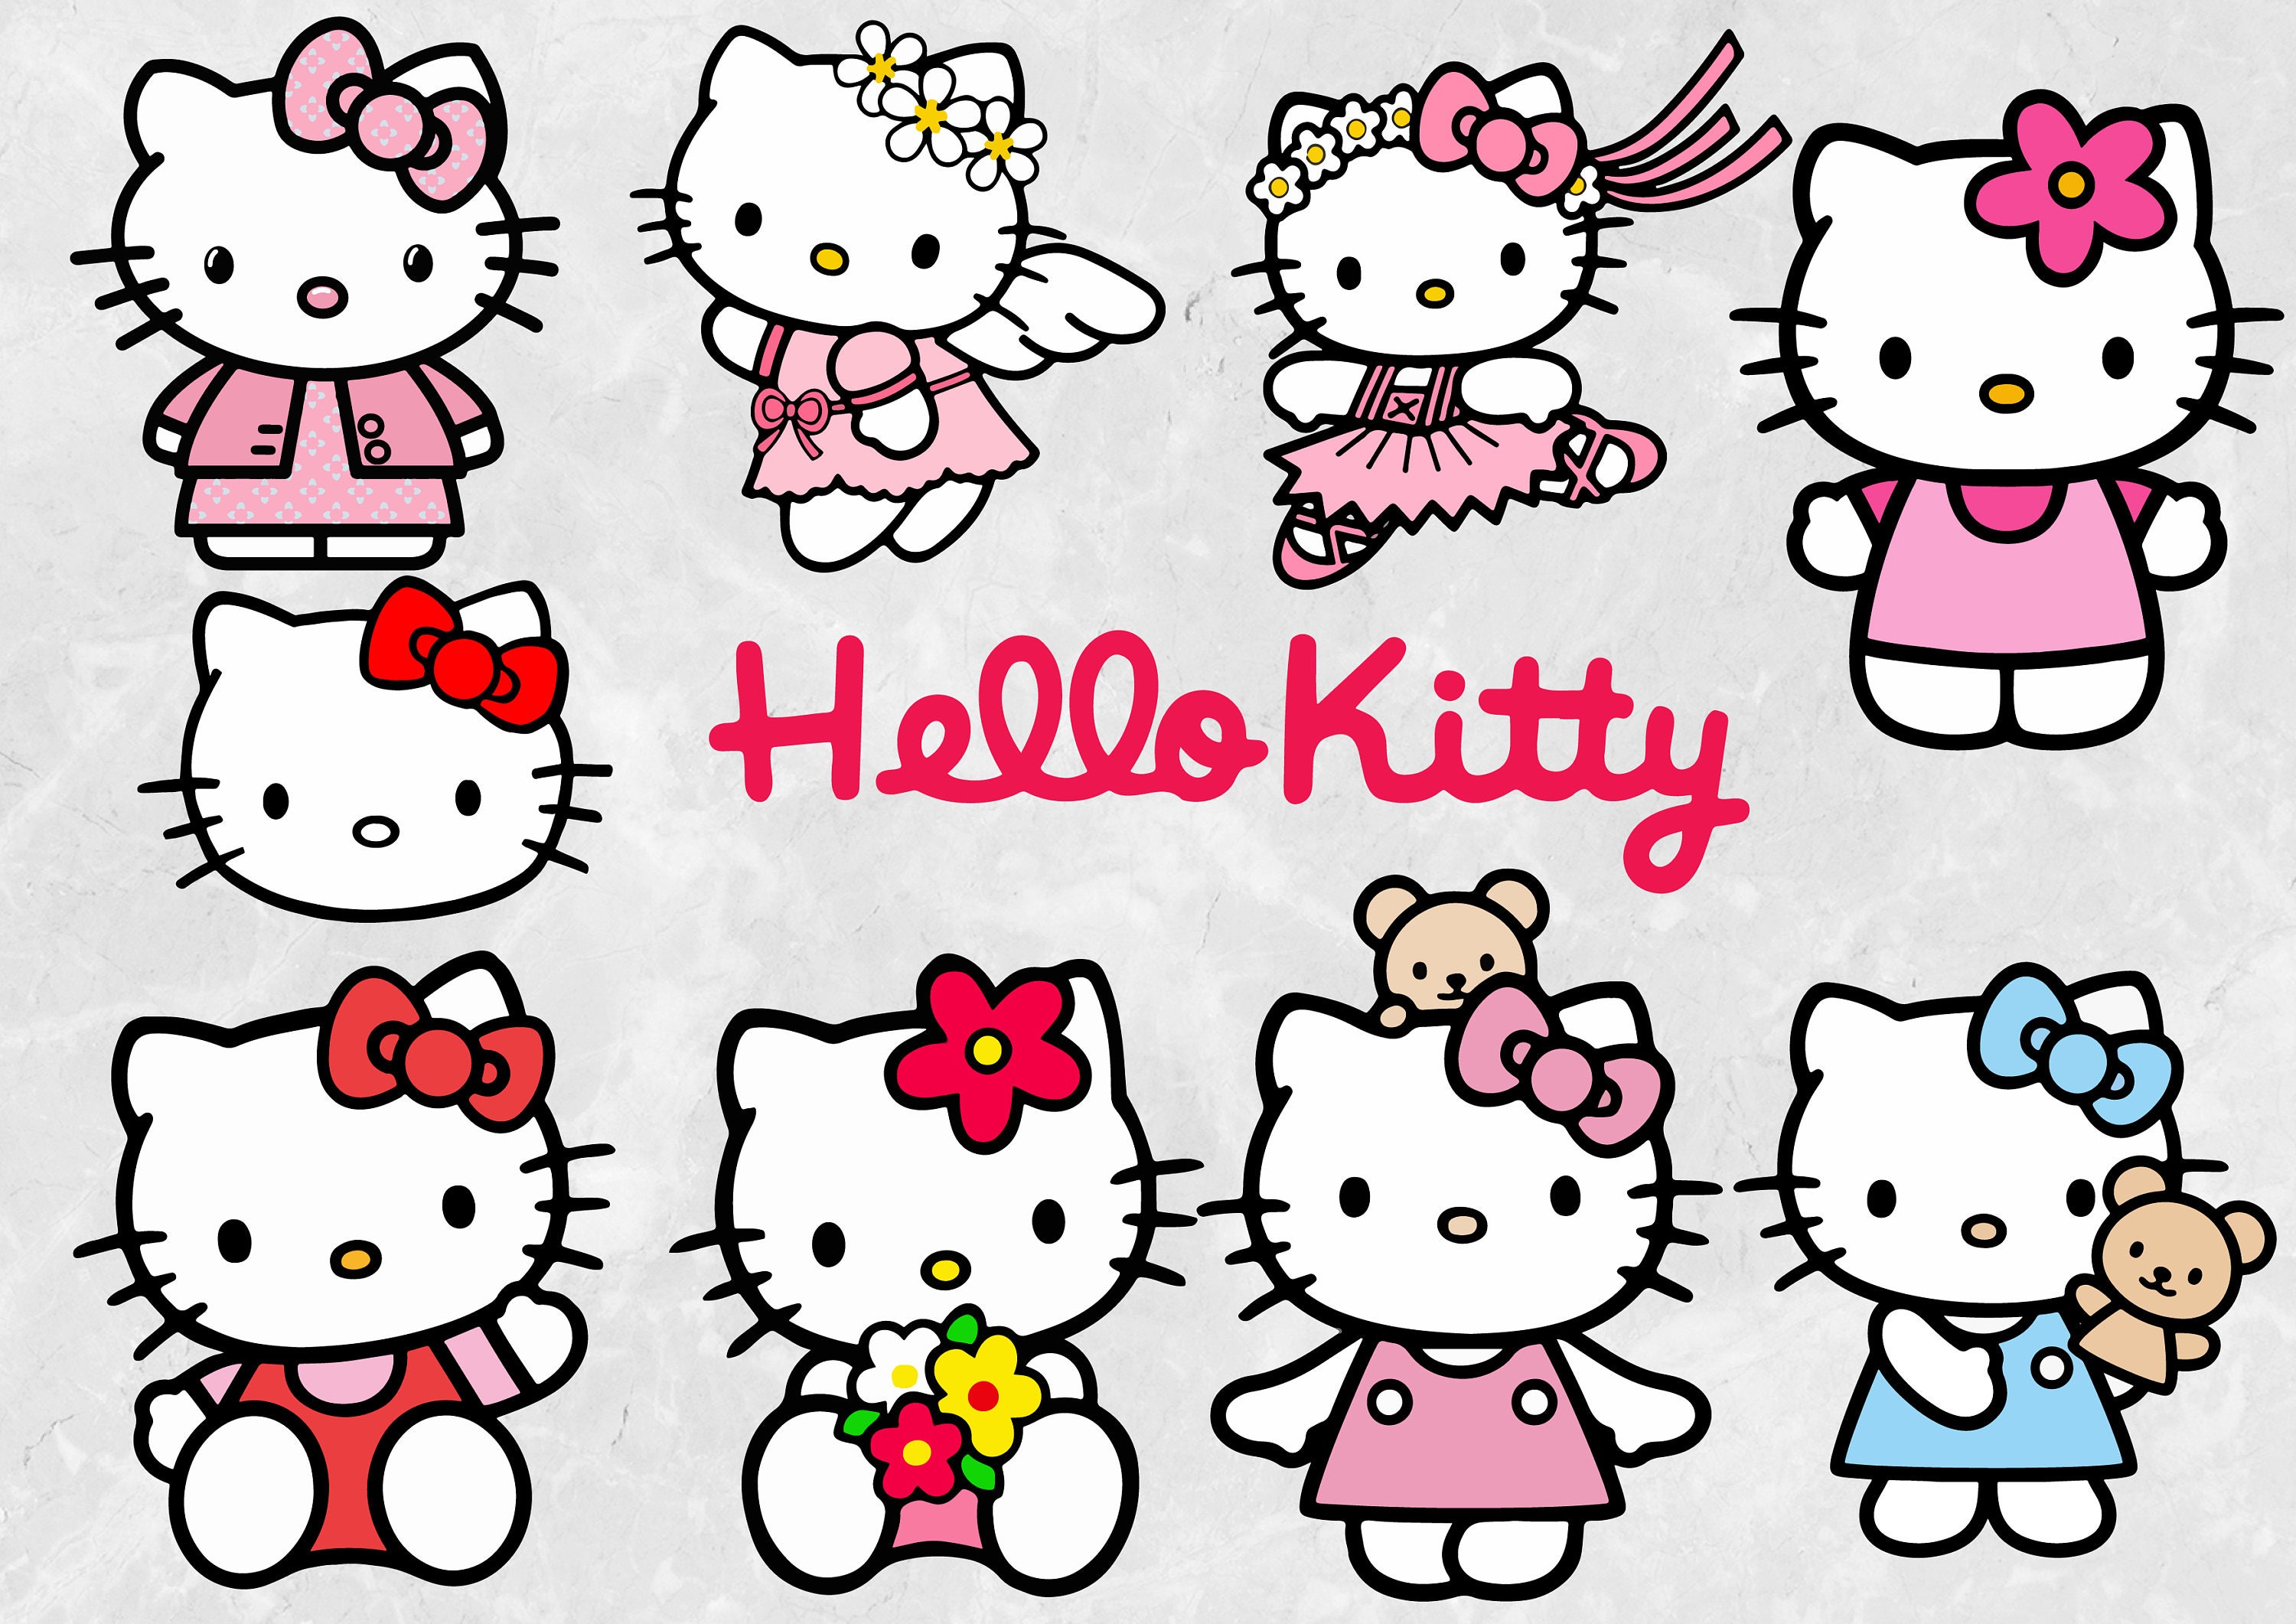 Download Hello kitty 10 clipart pack 300 PPI SVG cut file